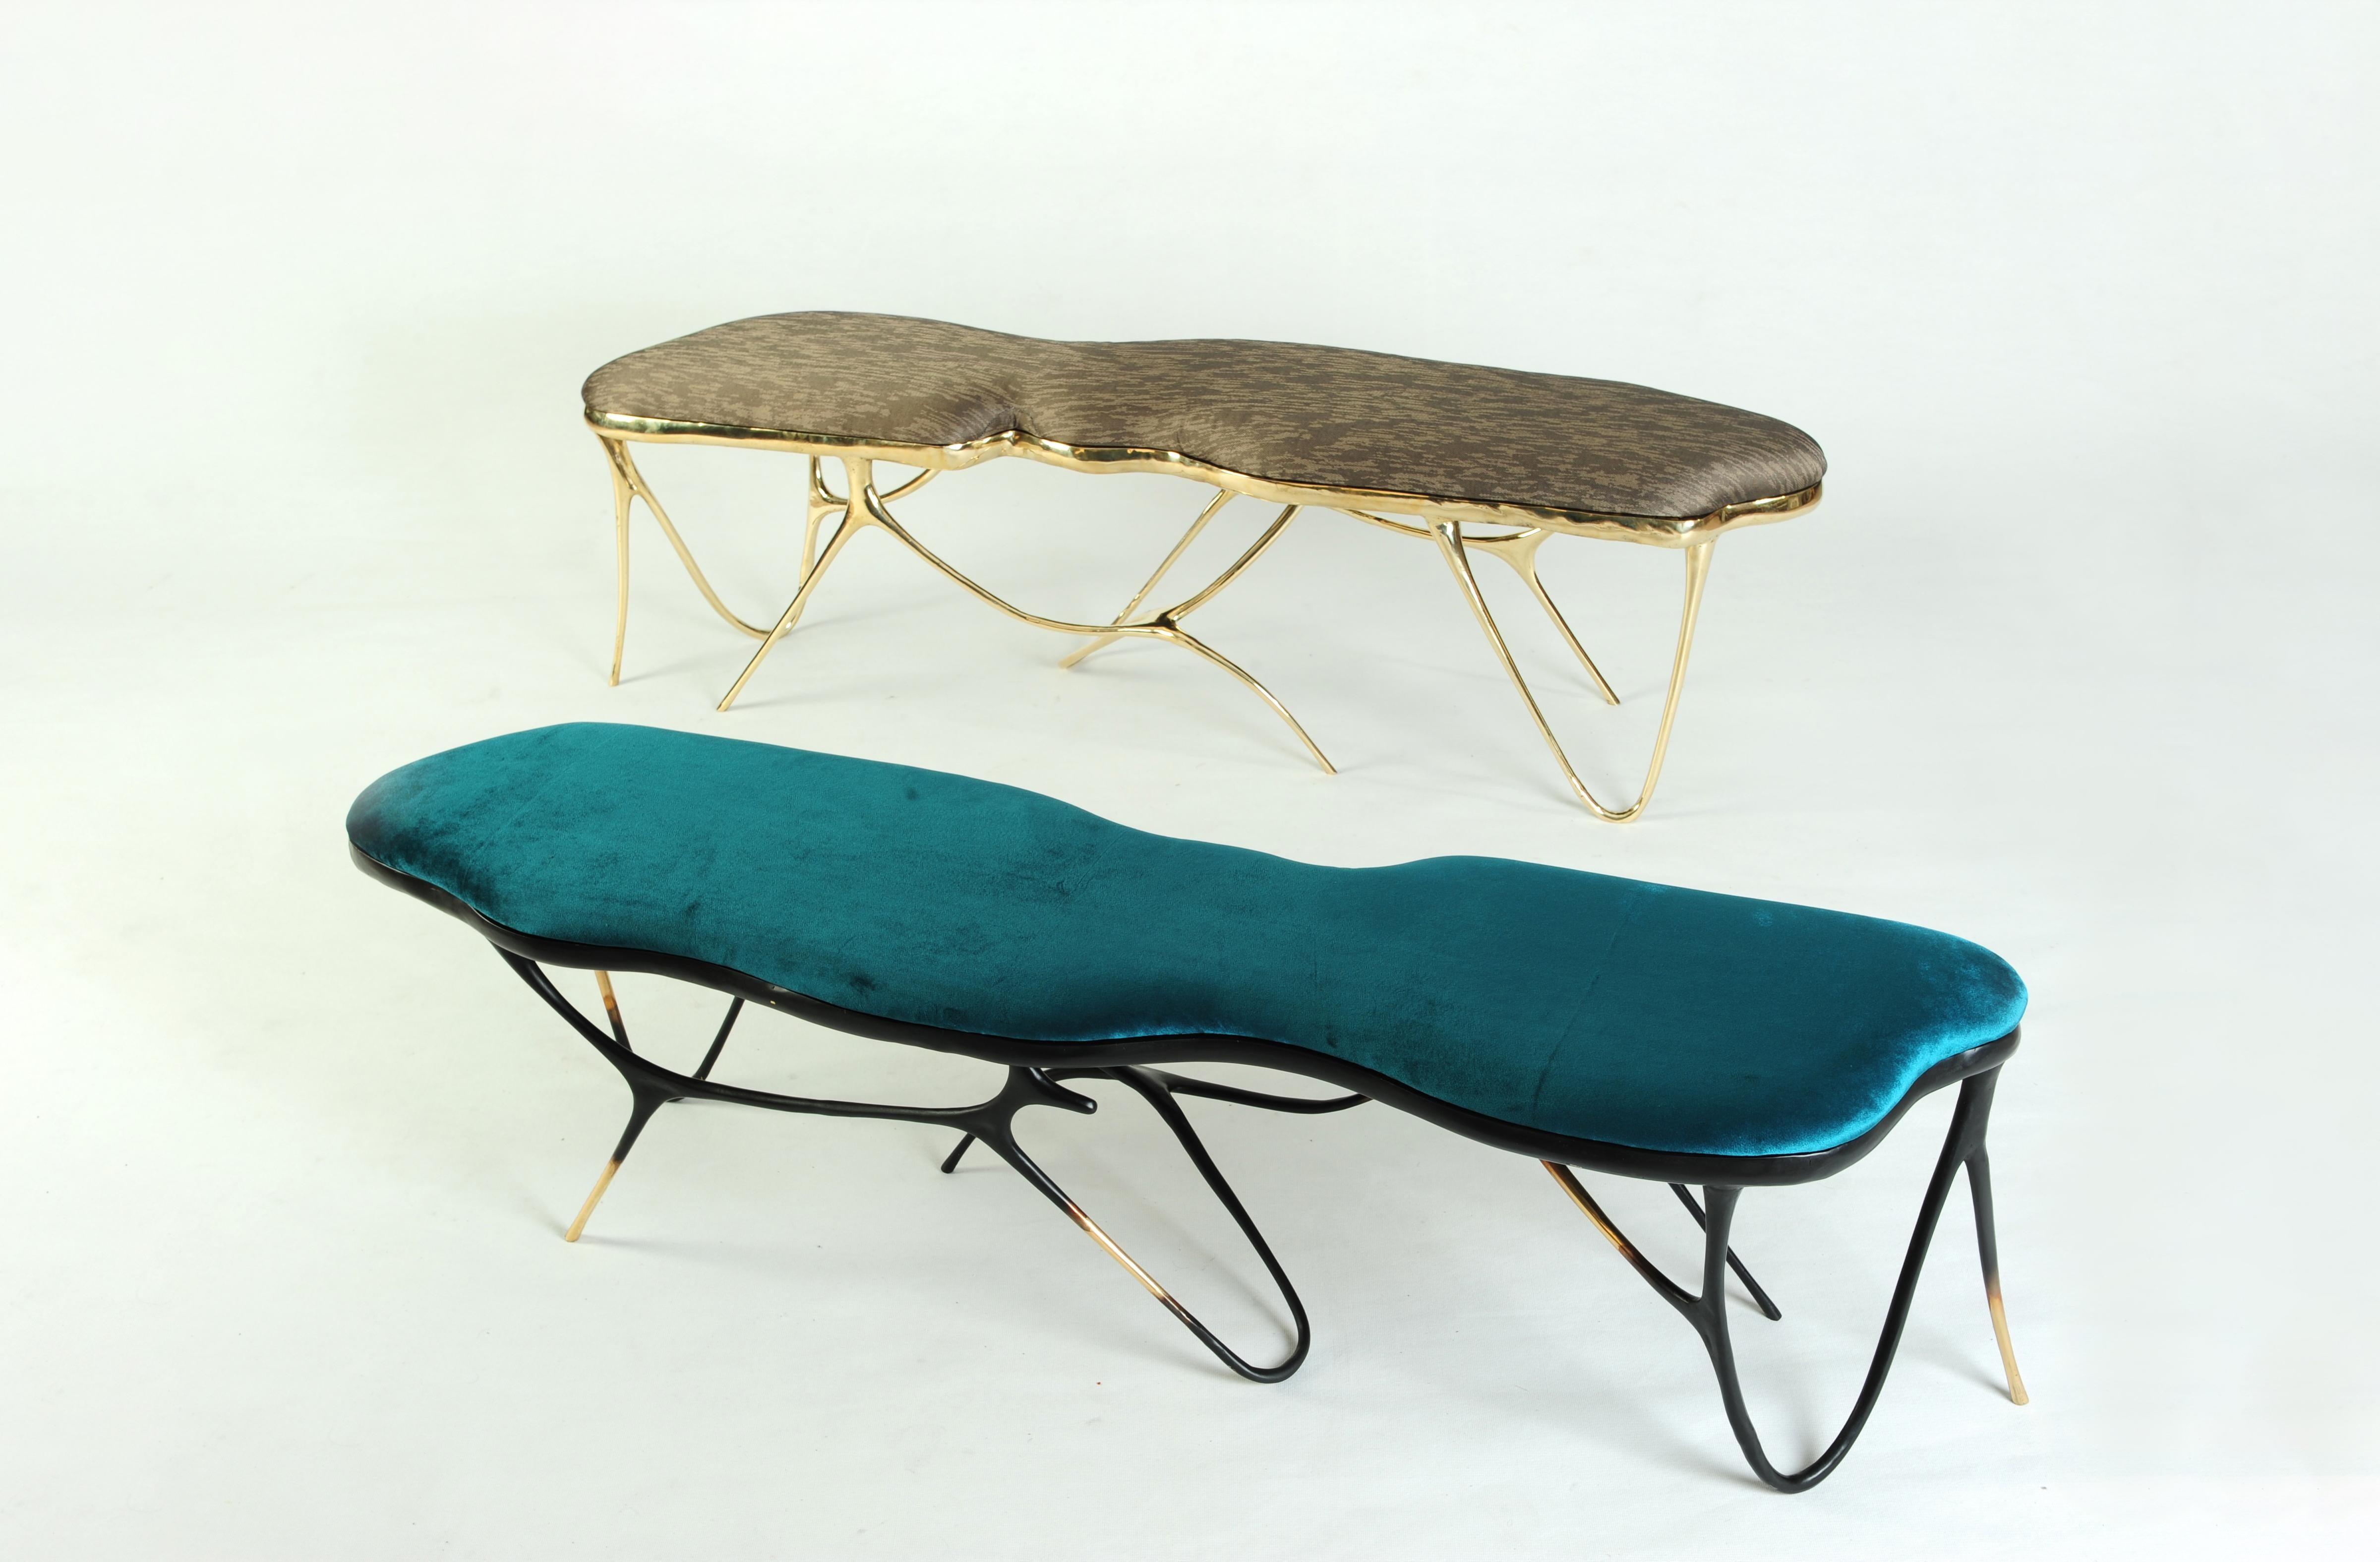 Calligraphic sculpted brass bench by Misaya.
Dimensions: W 158 x L 38 x H 40 cm.
Hand-sculpted brass table.

Misaya emulates Chinese ink paintings through the process of lost-wax casting.

Each piece in the Ink collection, which consists of a